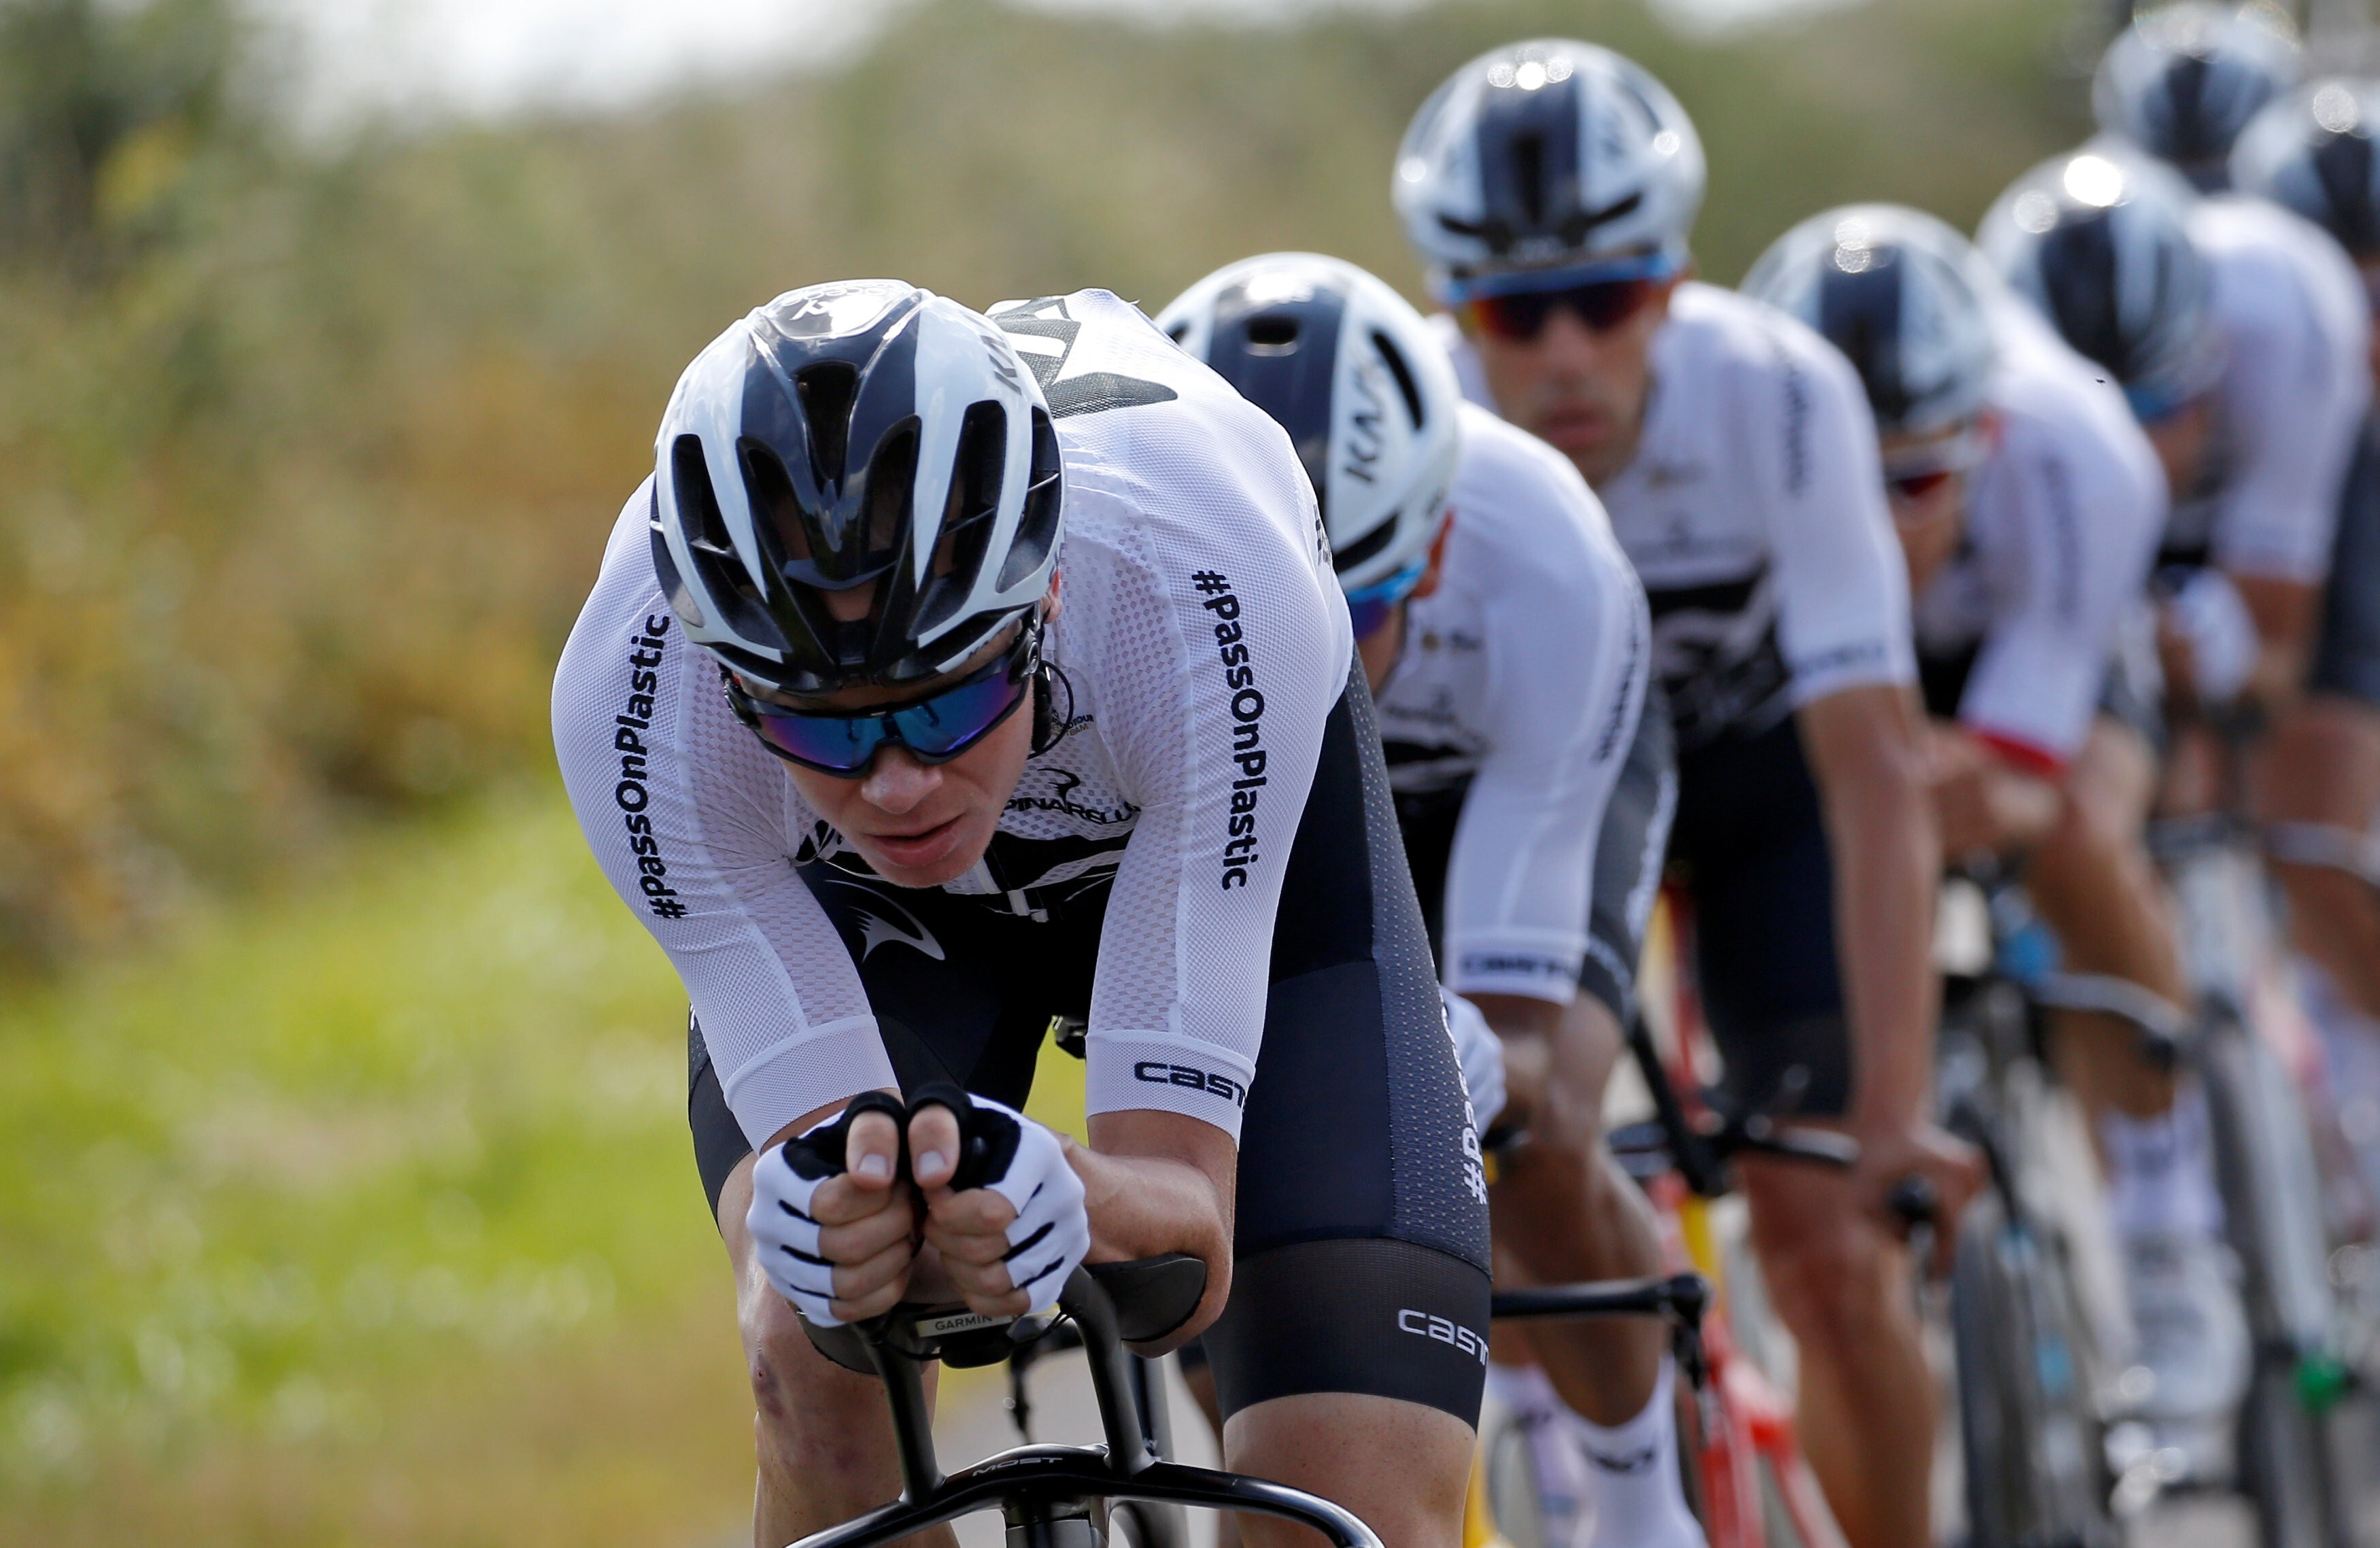 A new book delving into corruption in sports discusses how cycling’s Team Sky, now called Team Ineos, can help to restore trust among fans. Photo: Reuters